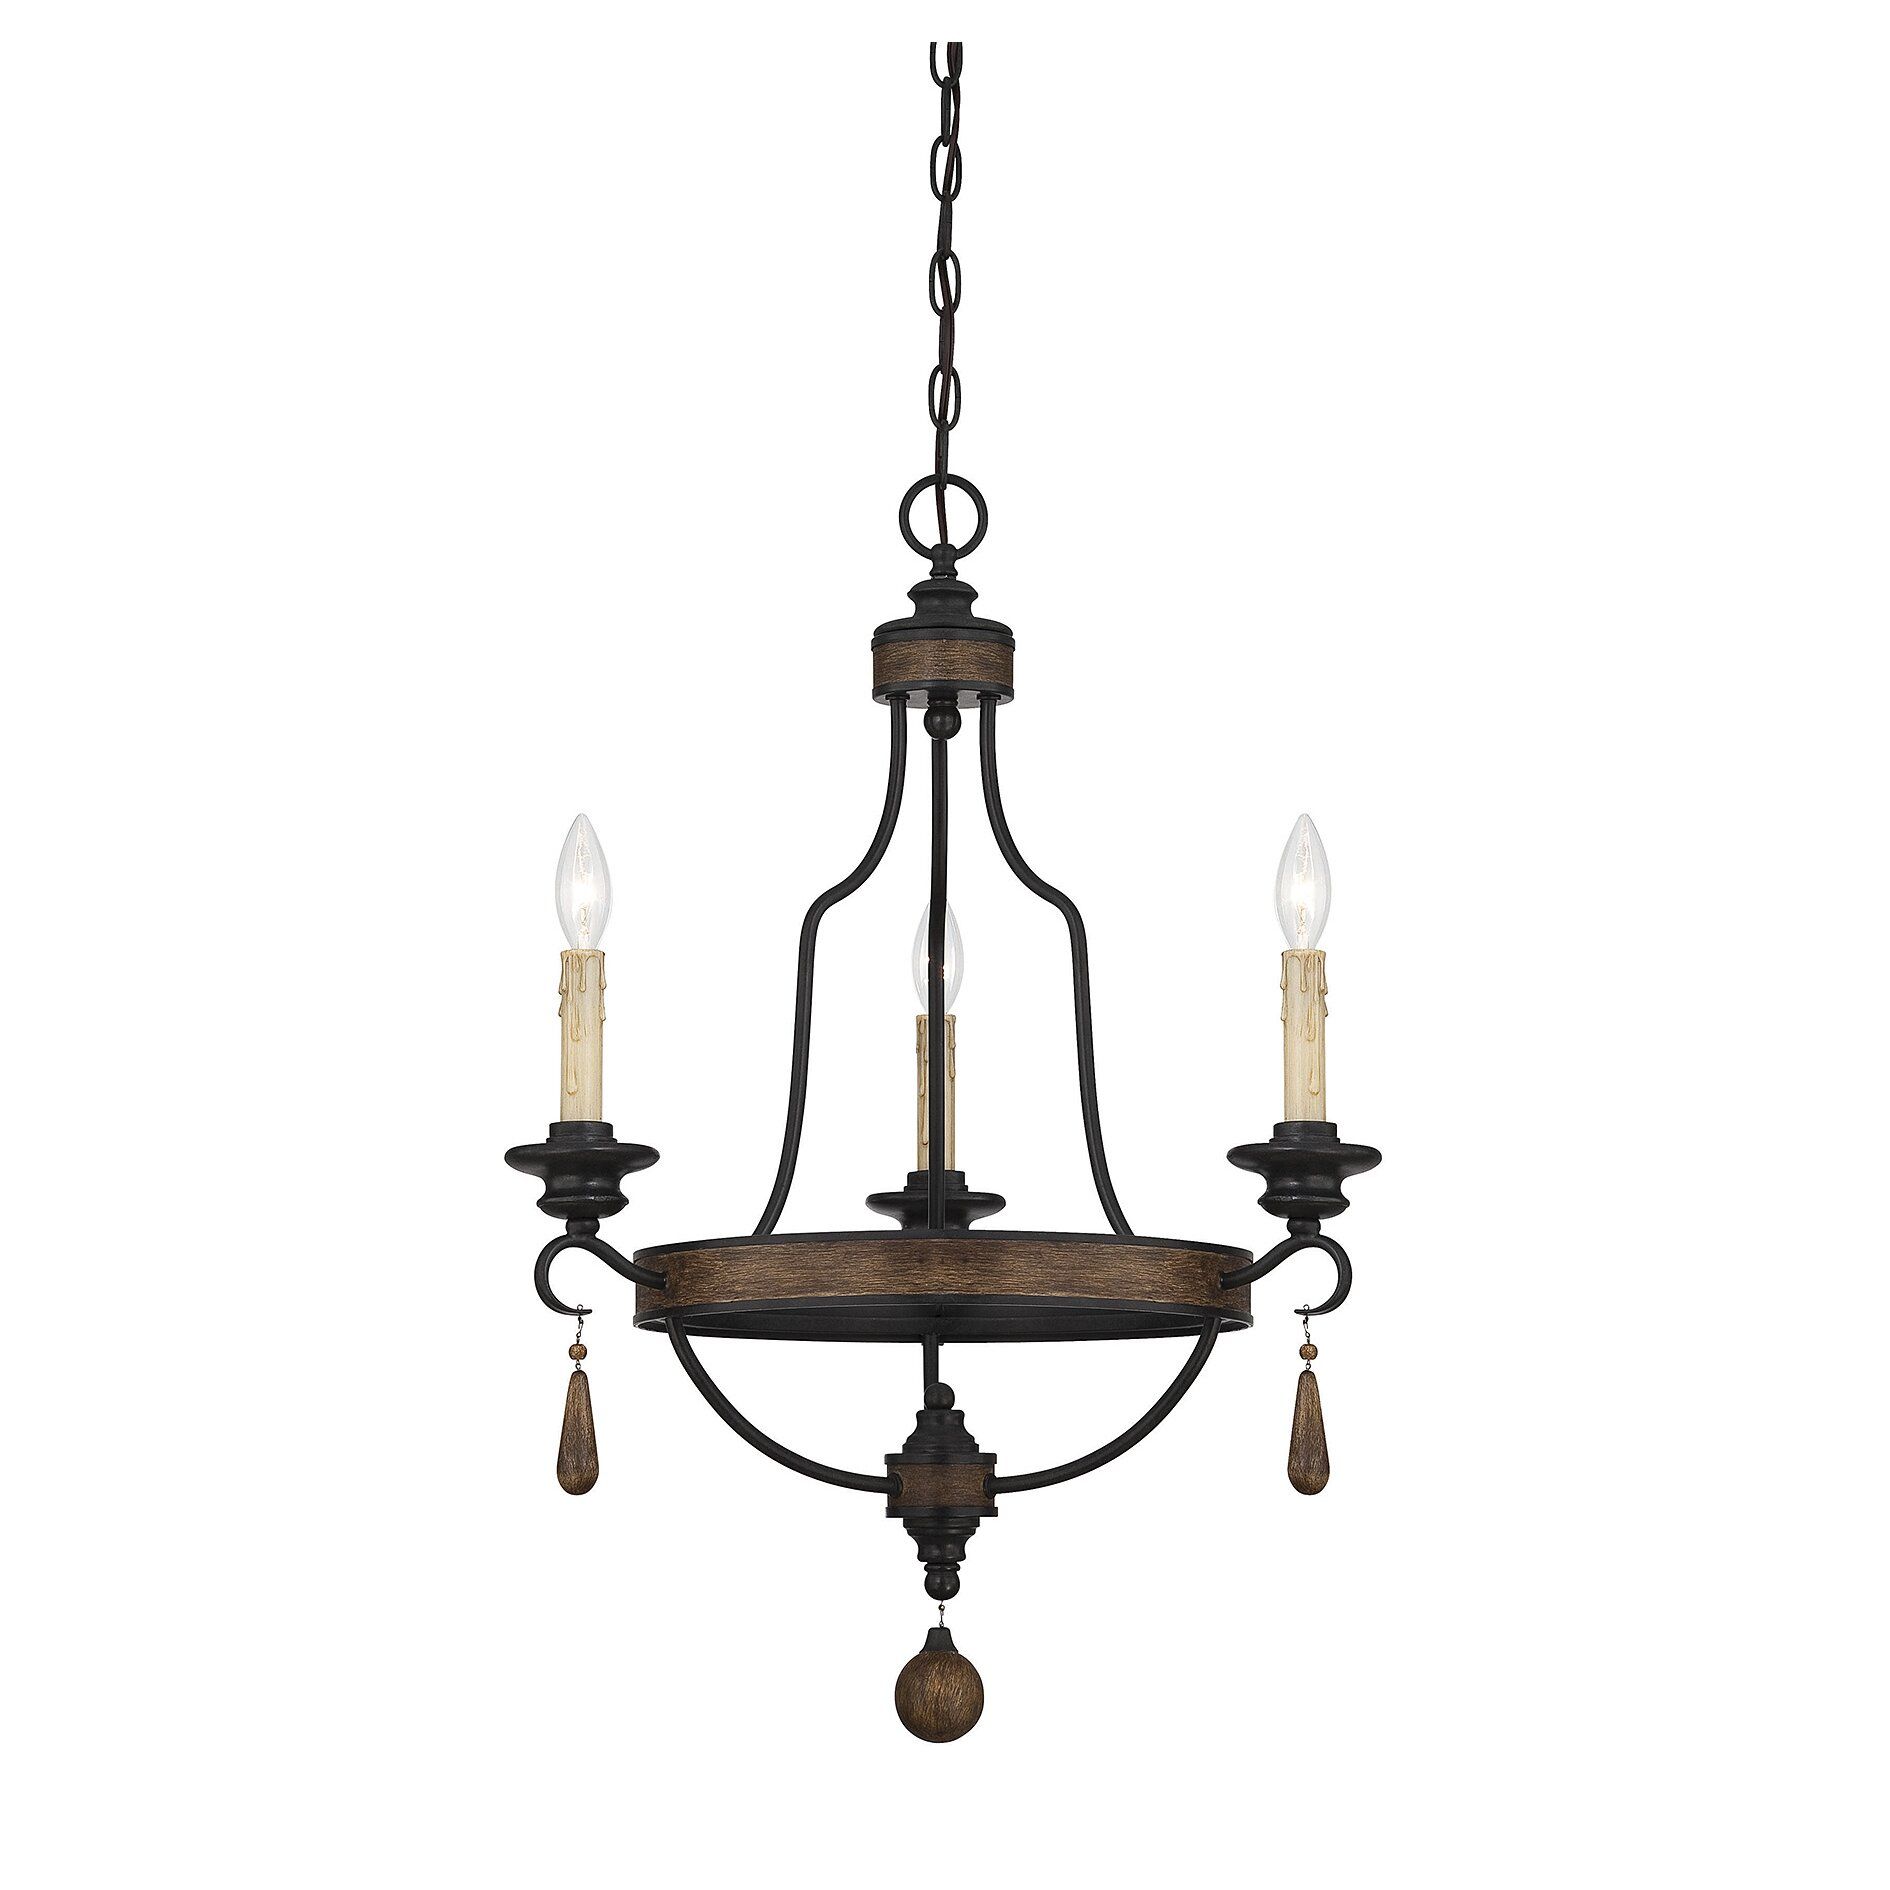 Savoy House Kelsey 3 Light Candle Chandelier & Reviews With 3 Light Pendant Chandeliers (View 7 of 15)